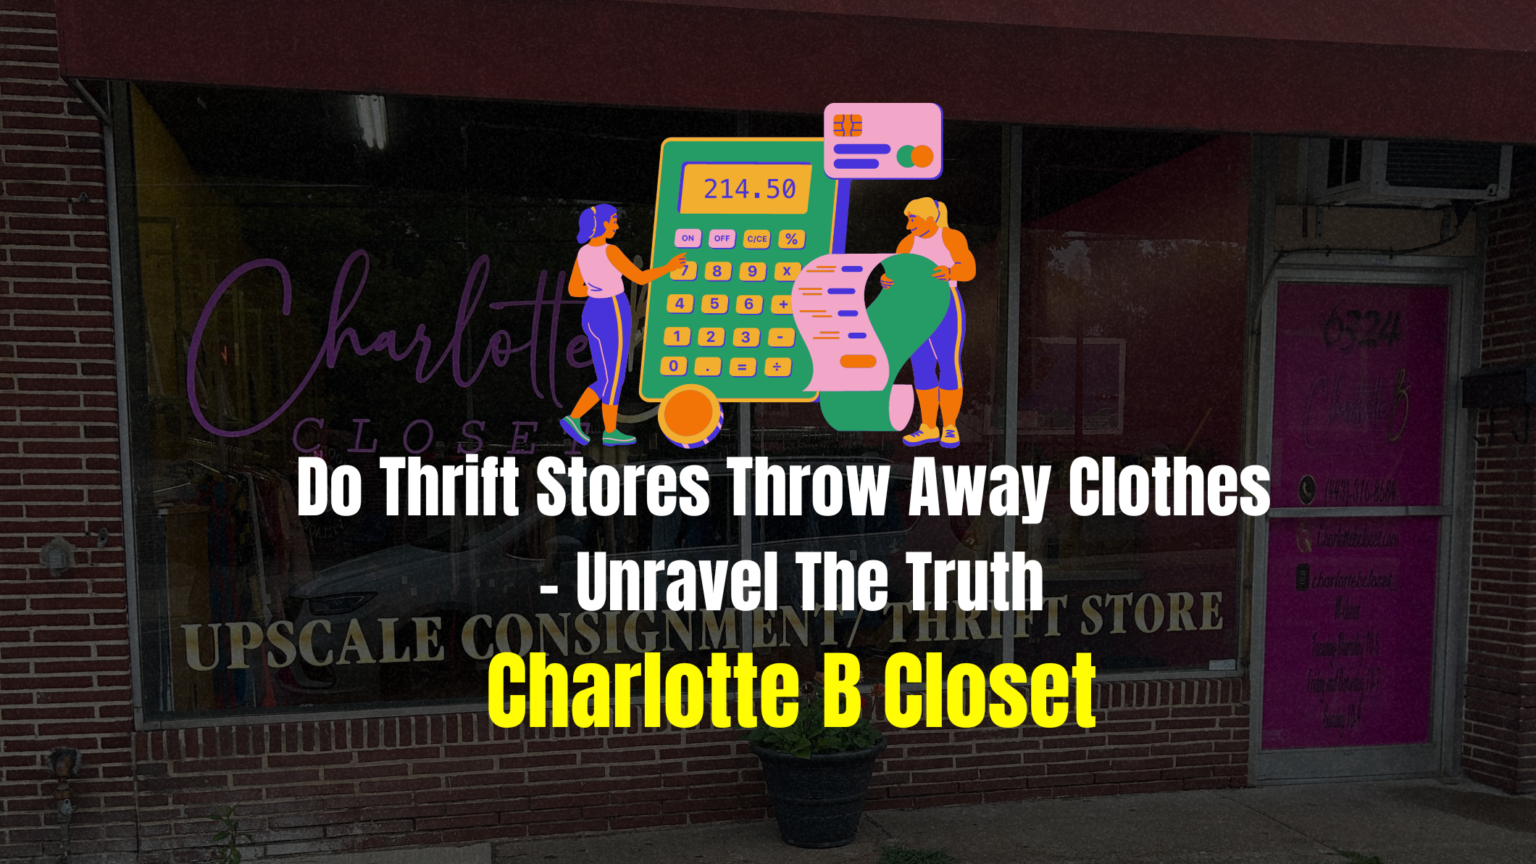 Do Thrift Stores Throw Away Clothes - Unravel The Truth